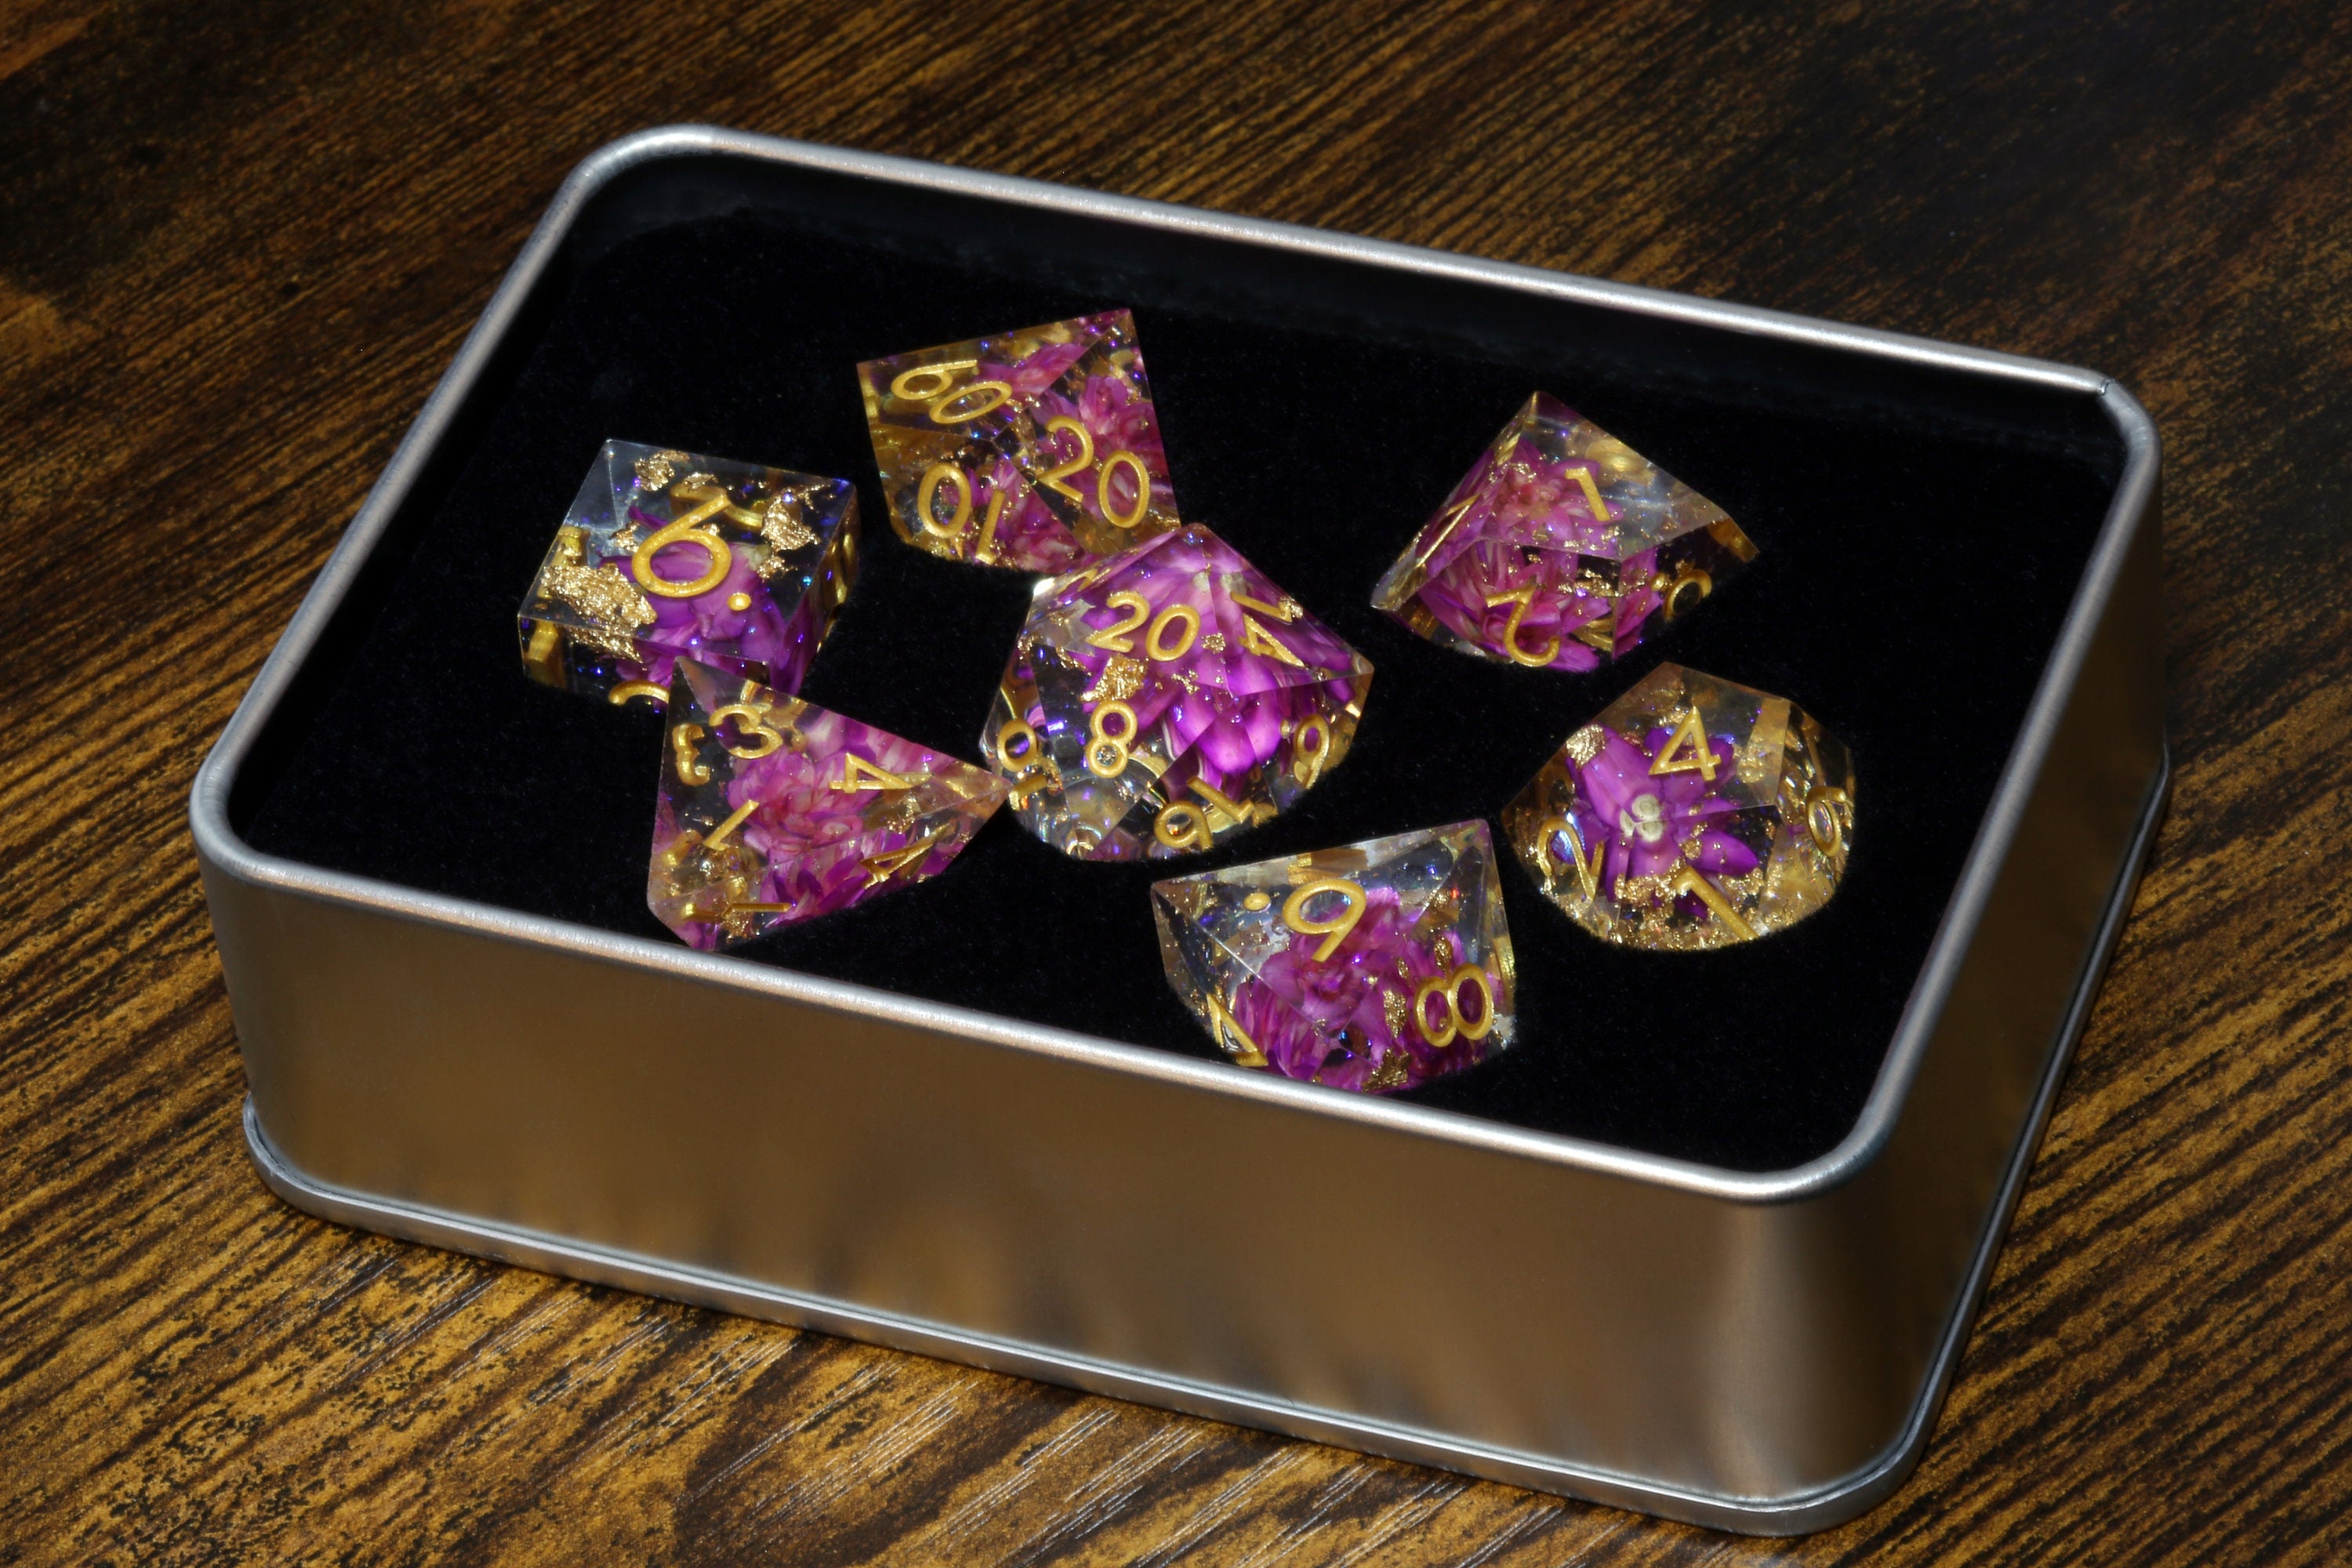 You're a critical hit to my heart dice box and fuchsia pink flowers sharp edge dice set